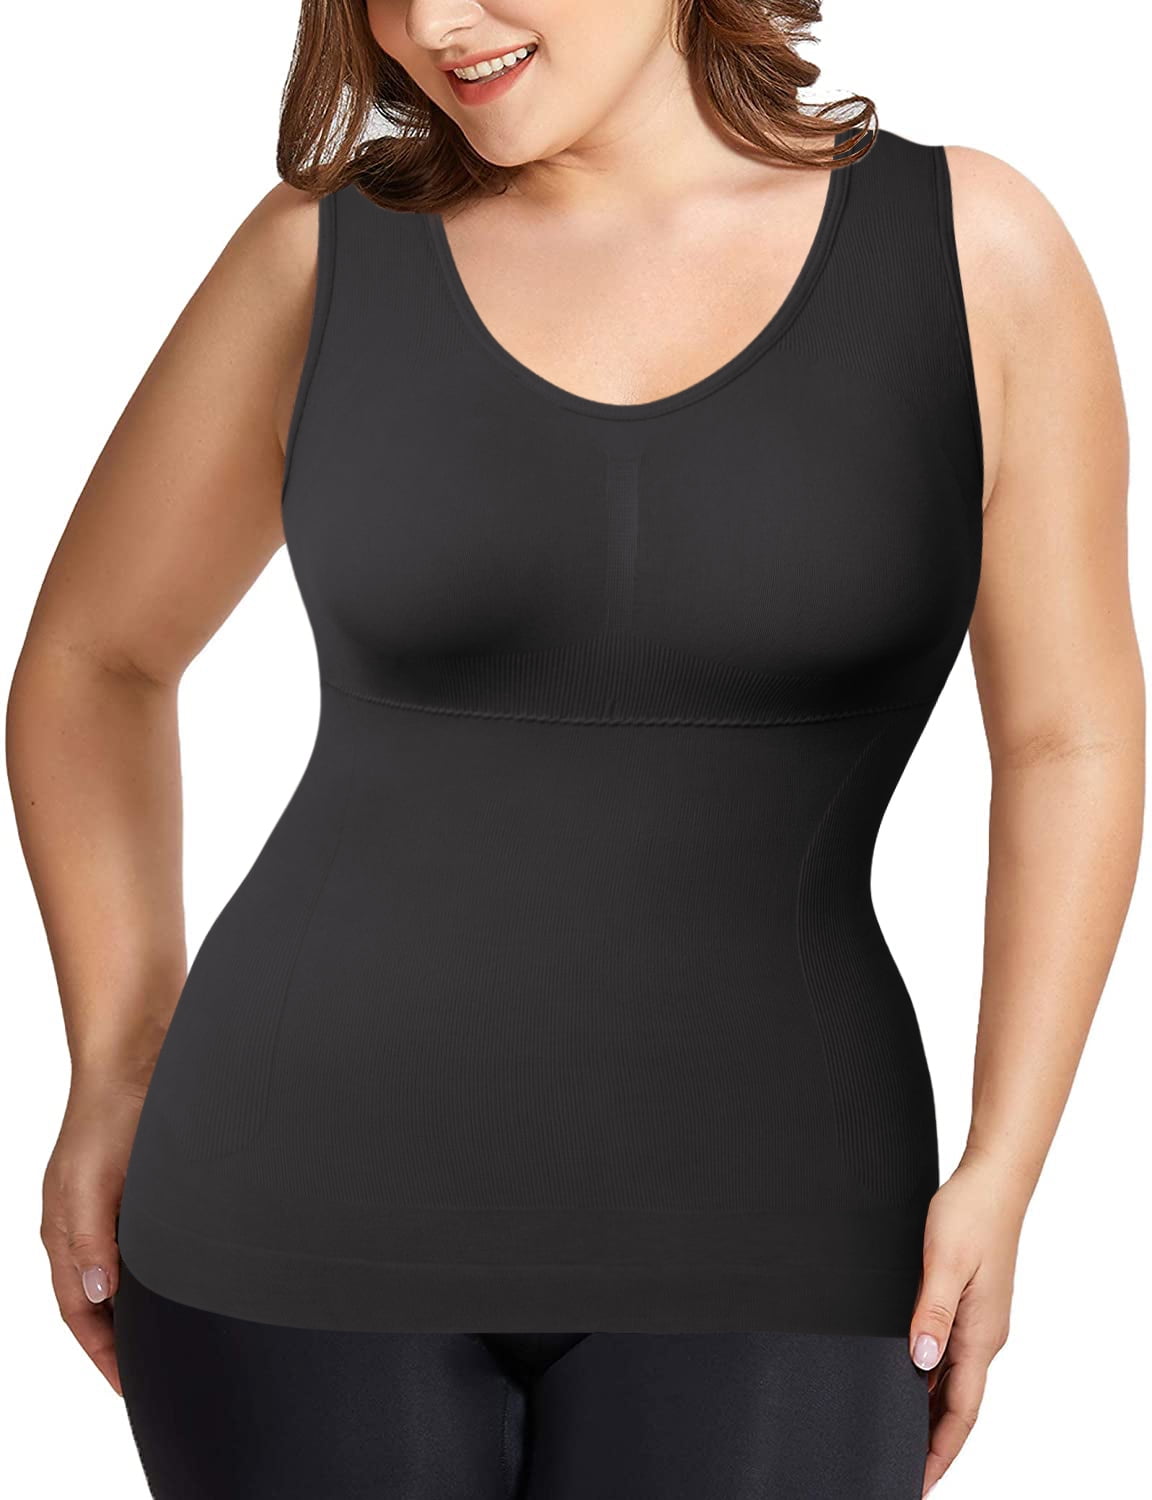 Comfree Women S Cami Shaper Plus Size With Built In Bra Camisole Tummy Control Tank Top